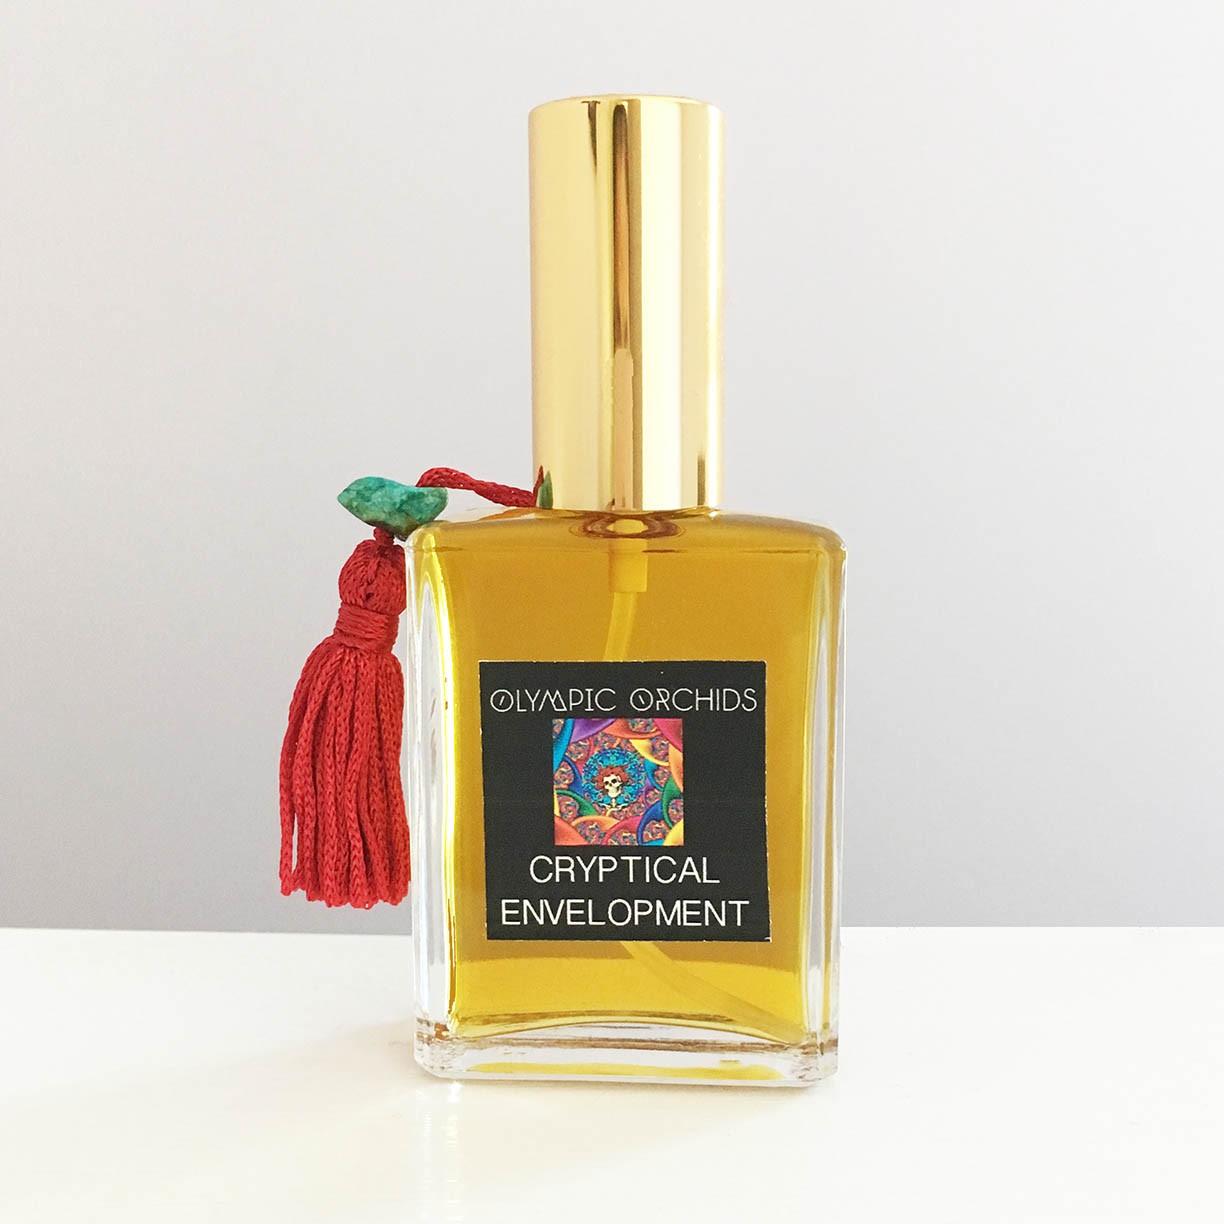 olympic orchids artisan perfumes cryptical envelopment